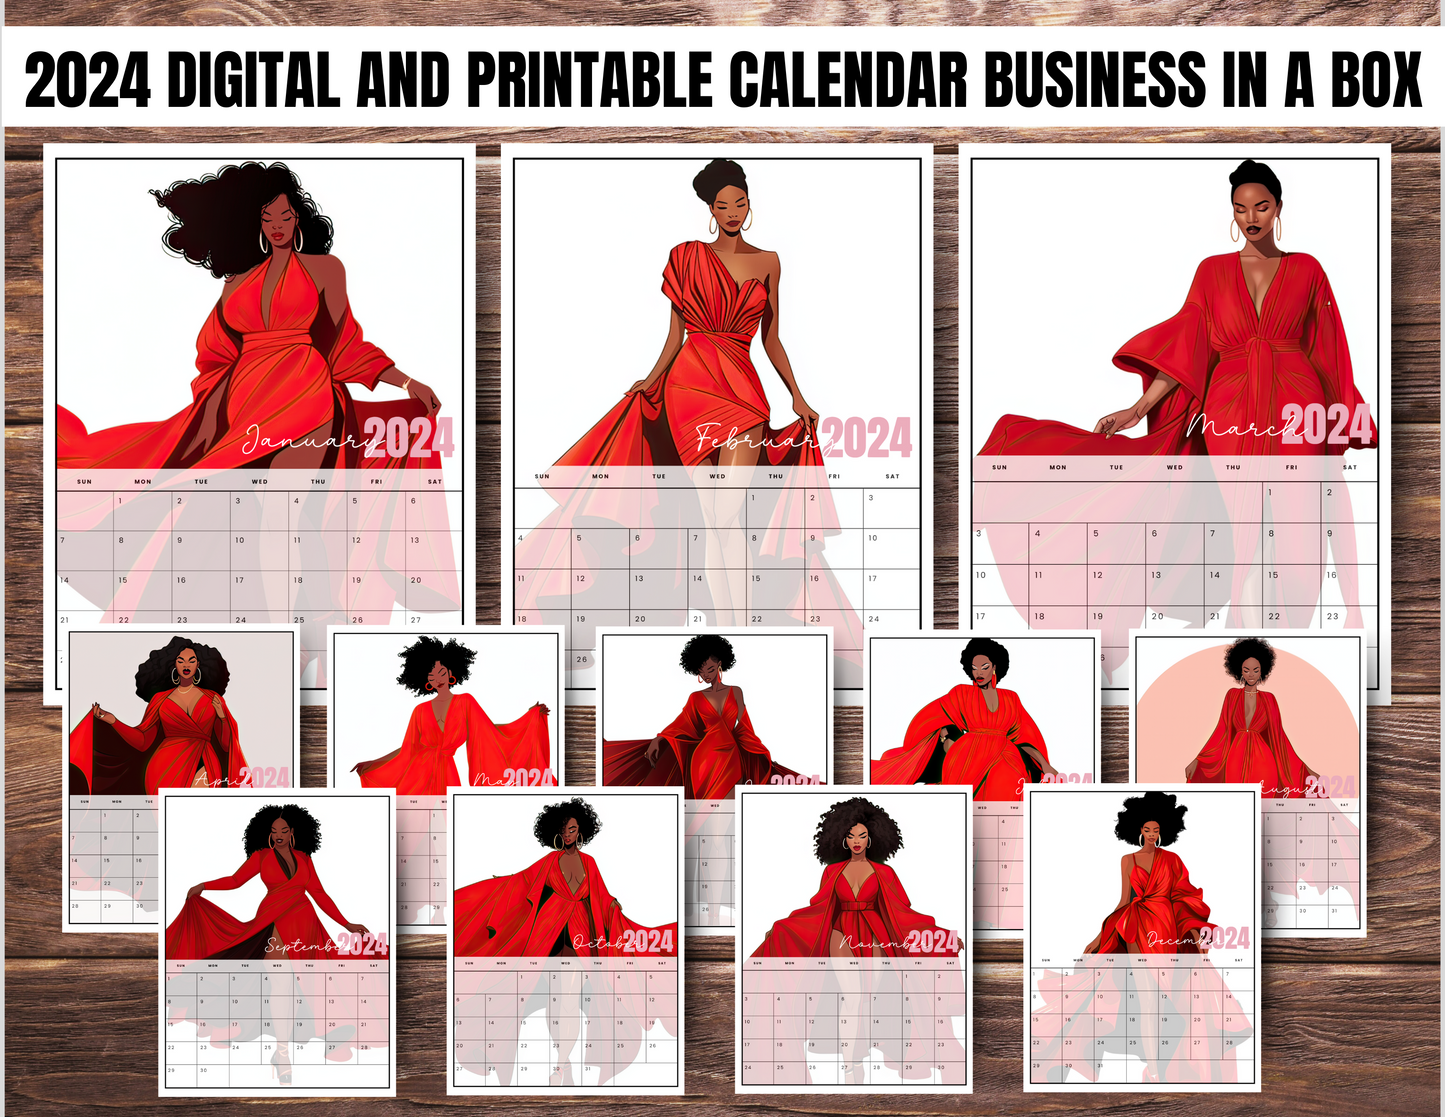 014-EB | Create & Sell Your Own 2024 Calendars | DFY Designs & Templates